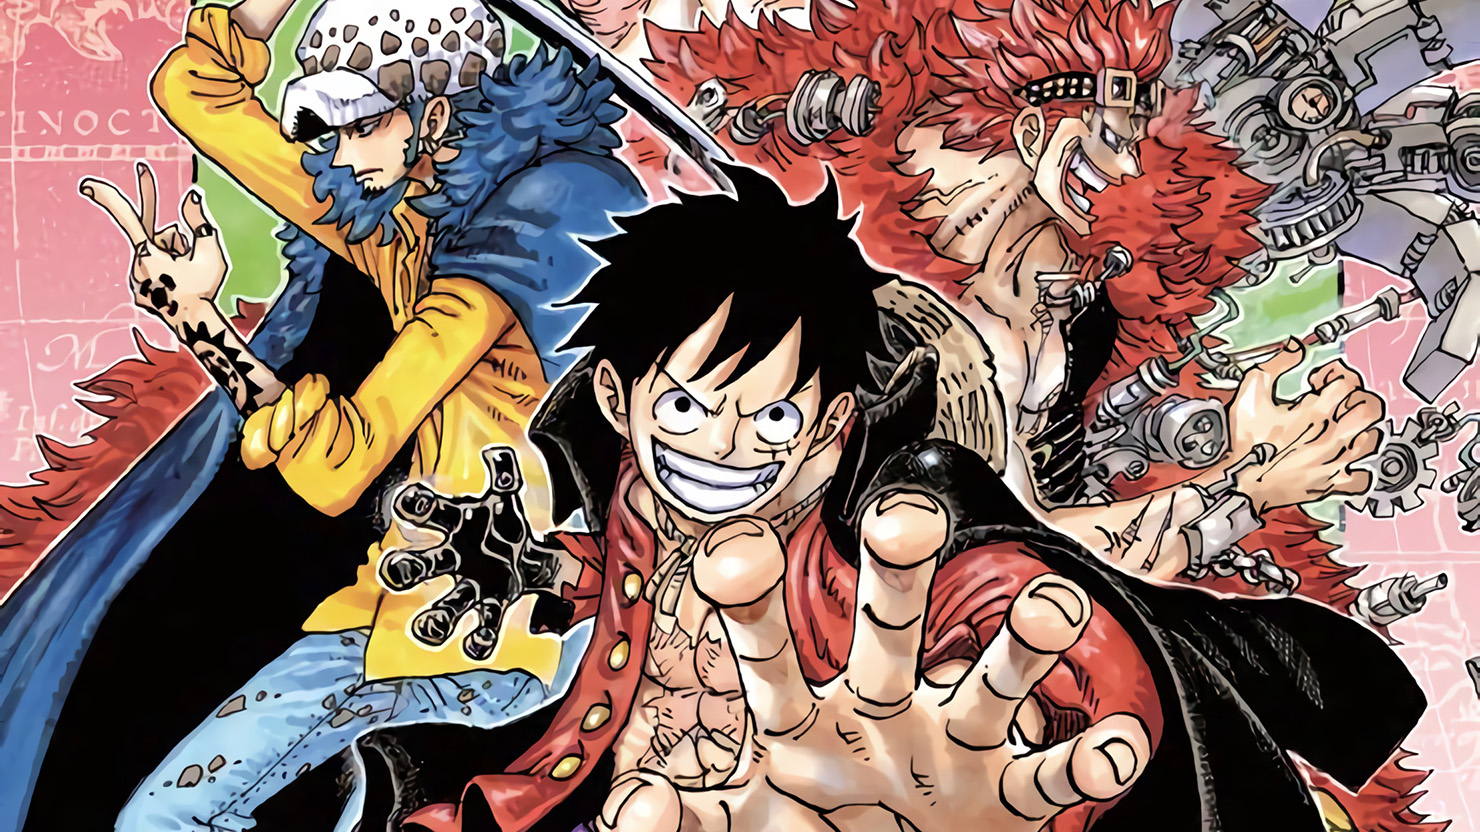 The most popular manga in the history of "One-Piece" has a circulation